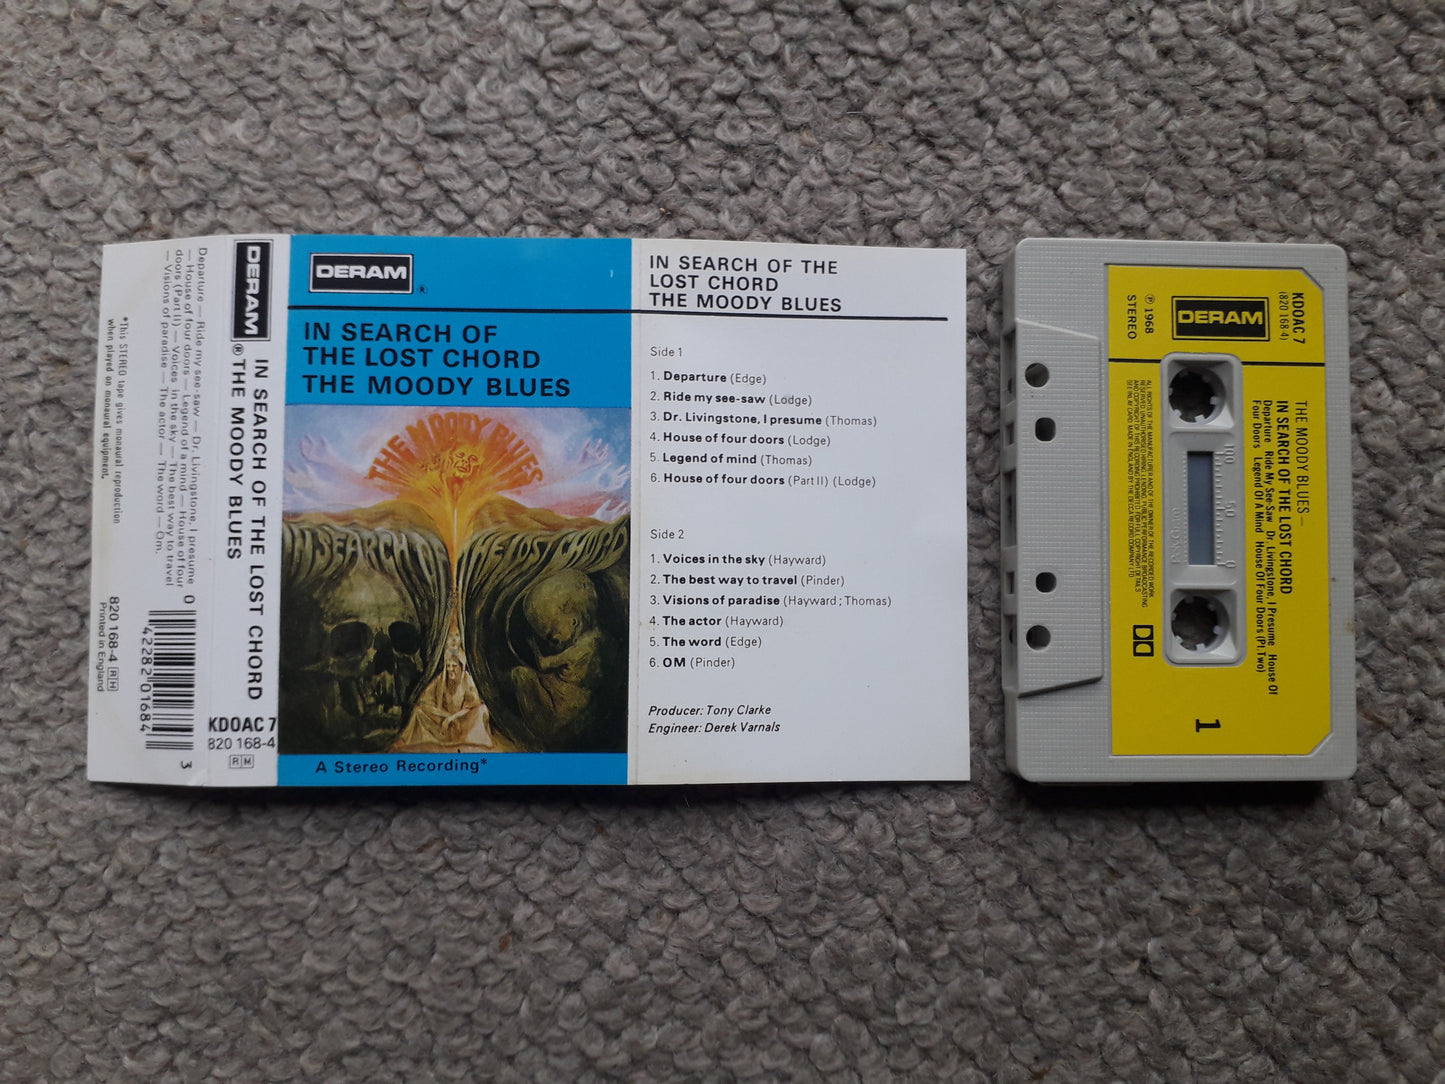 The Moody Blues-In Search Of The Lost Chord Cassette (KDOAC 7)